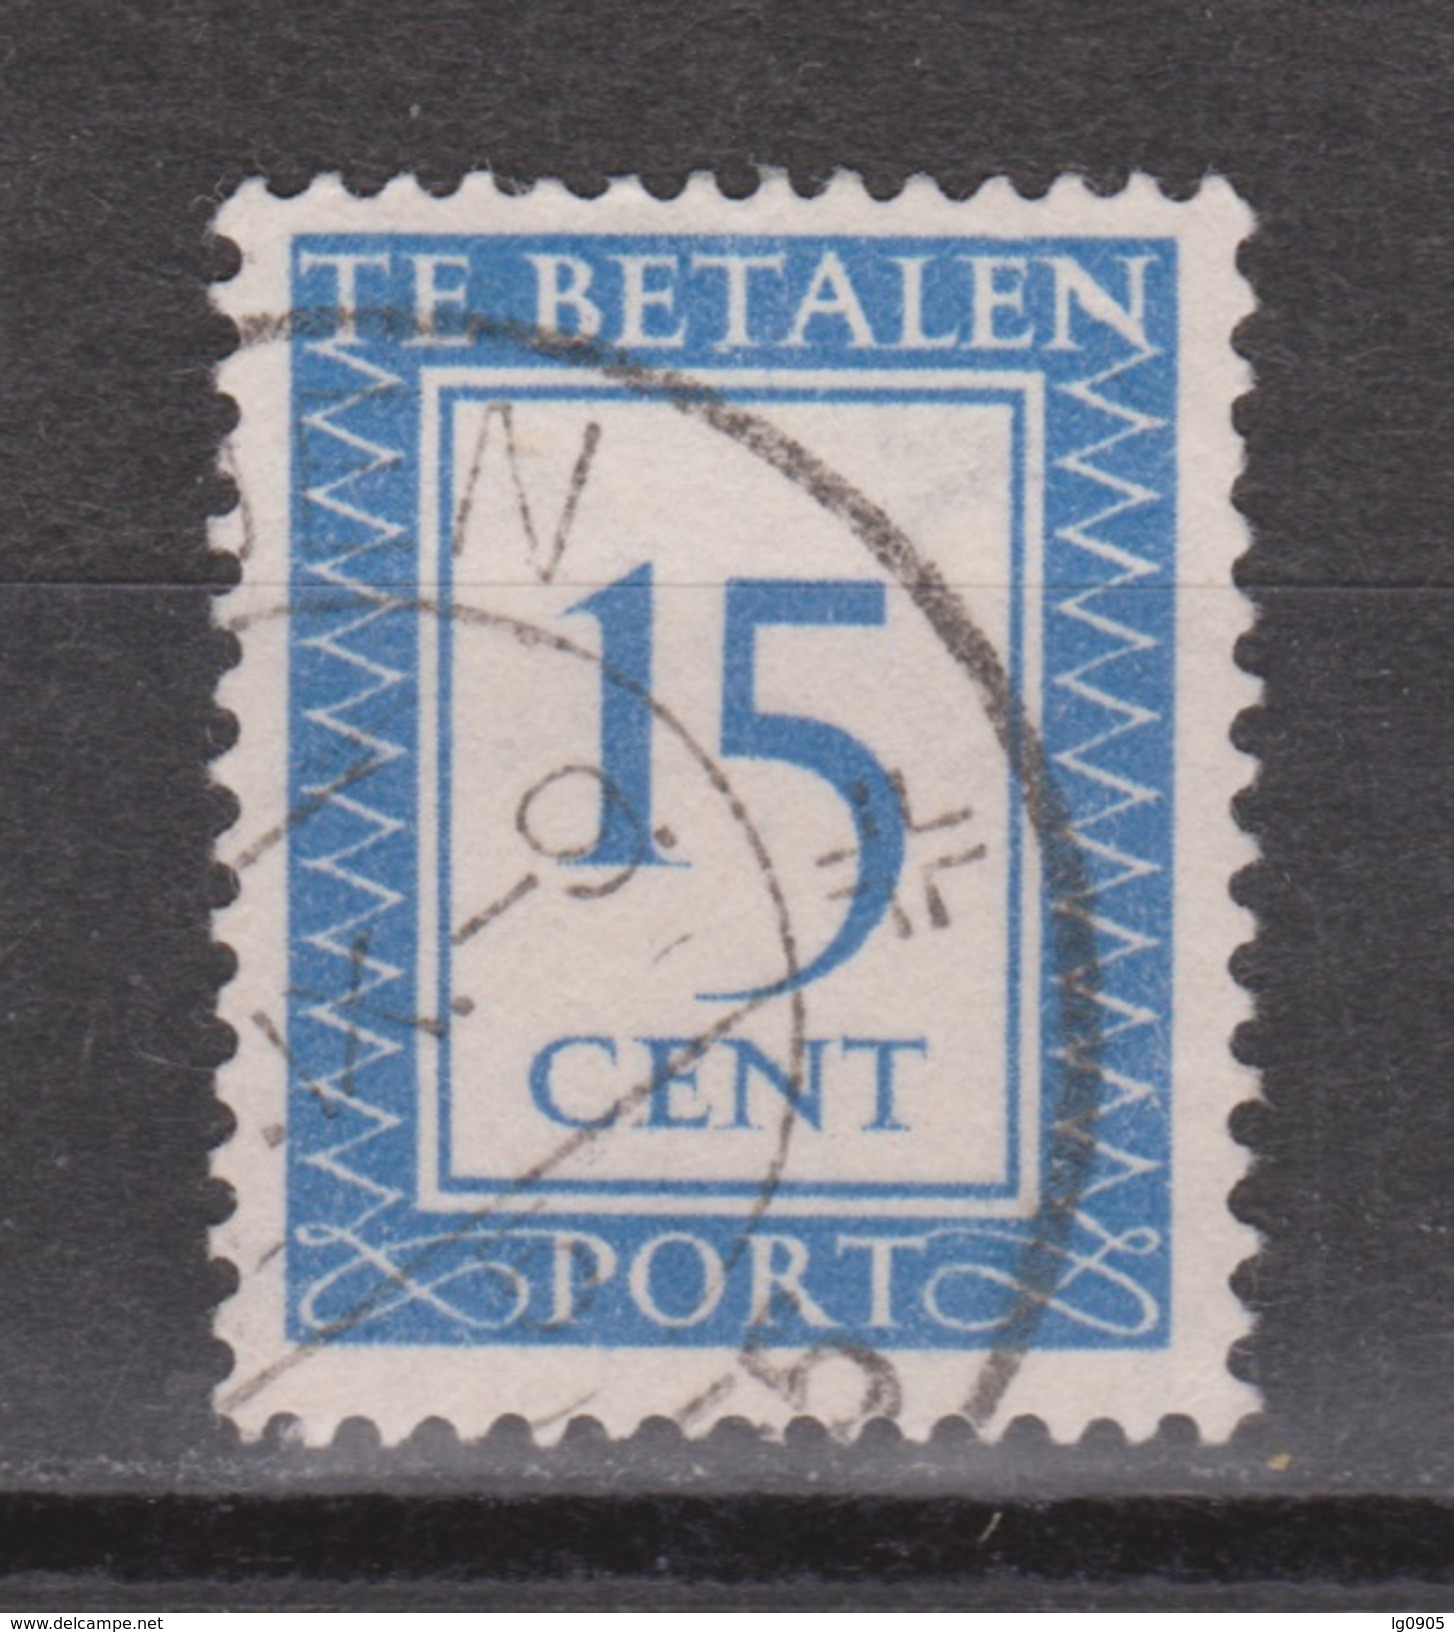 NVPH Nederland Netherlands Holanda Pays Bas Port 91 Used Timbre-taxe, Postmarke, Sellos De Correos NOW MANY DUE STAMPS - Impuestos